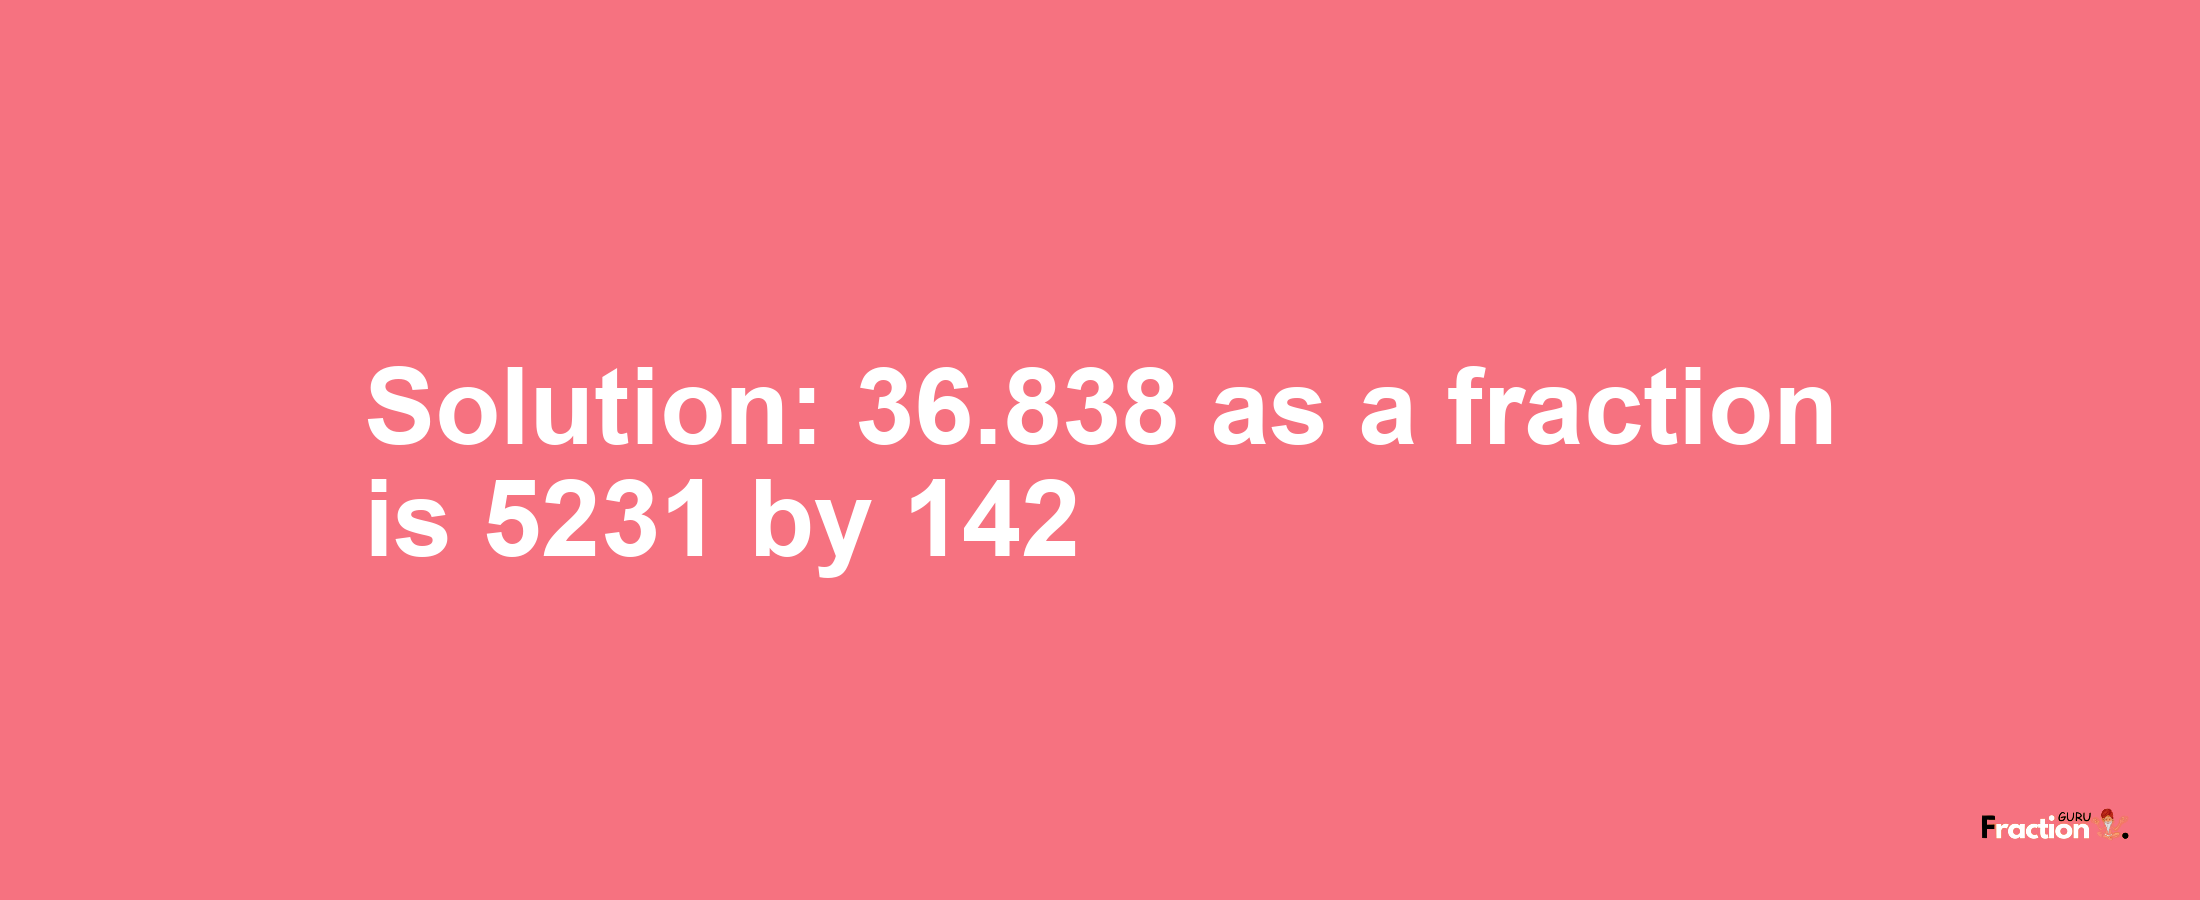 Solution:36.838 as a fraction is 5231/142